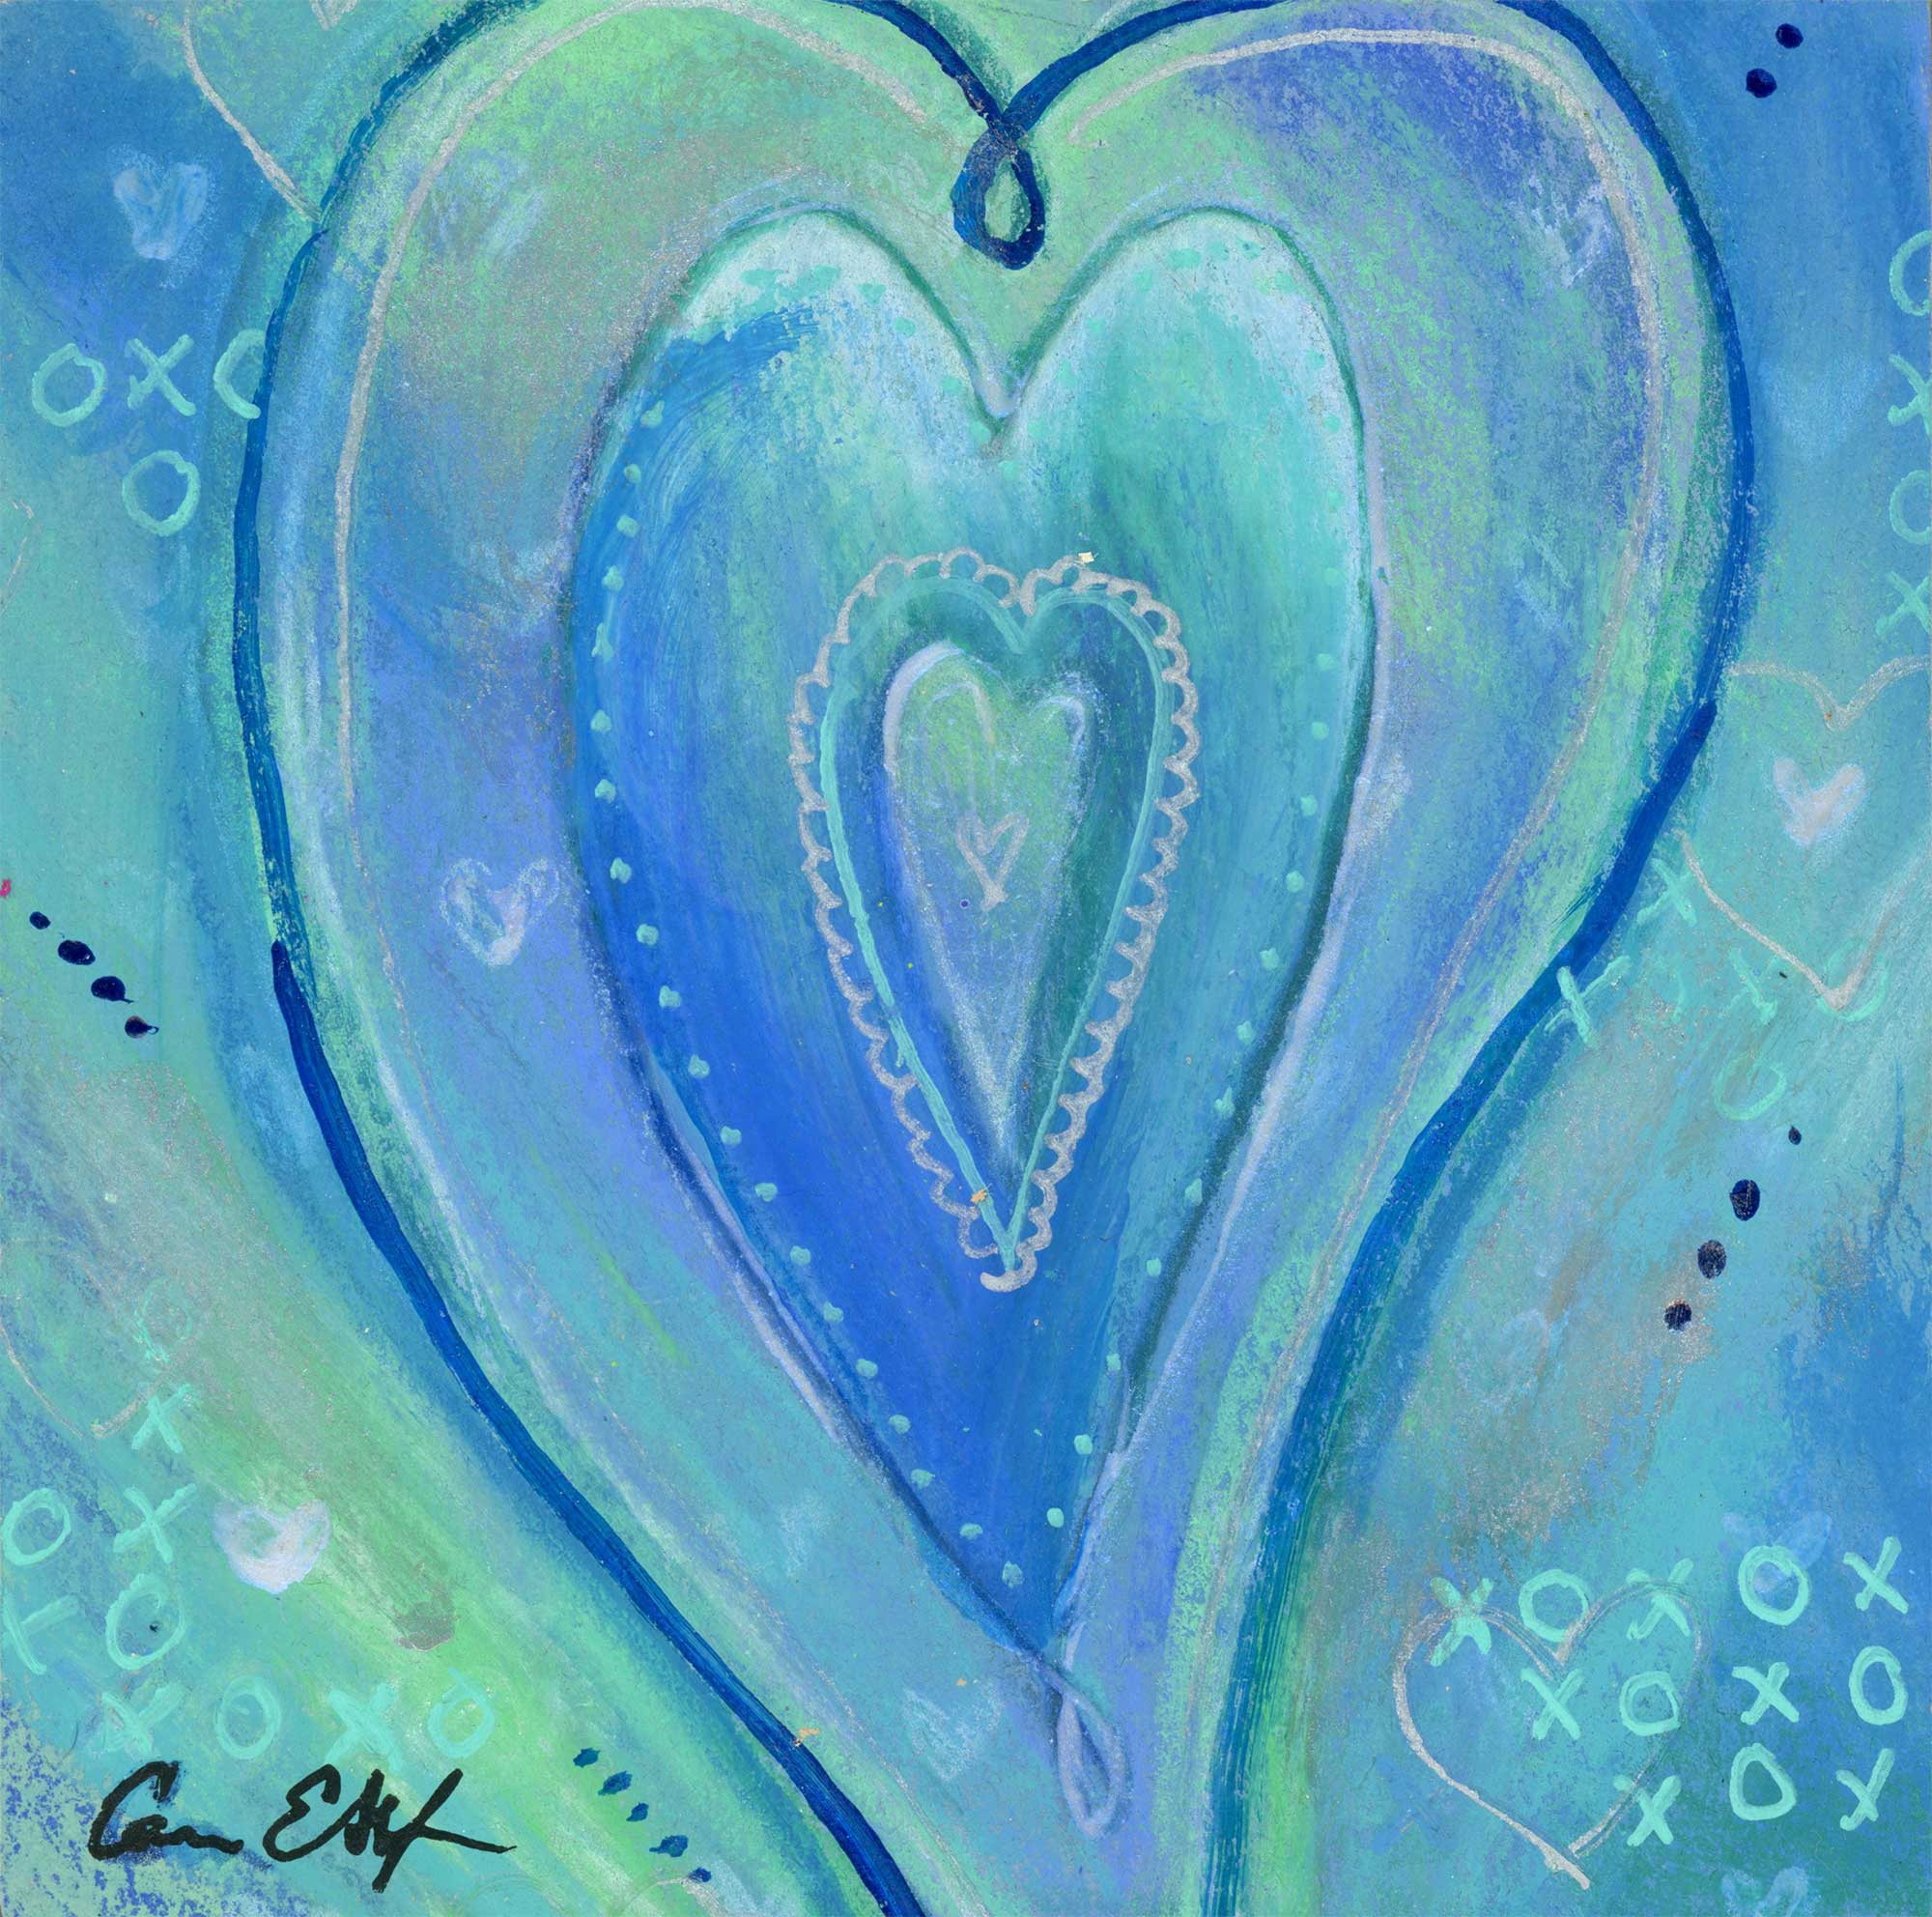 SOLD - "Heart of Blue", 4" x 4", mixed media